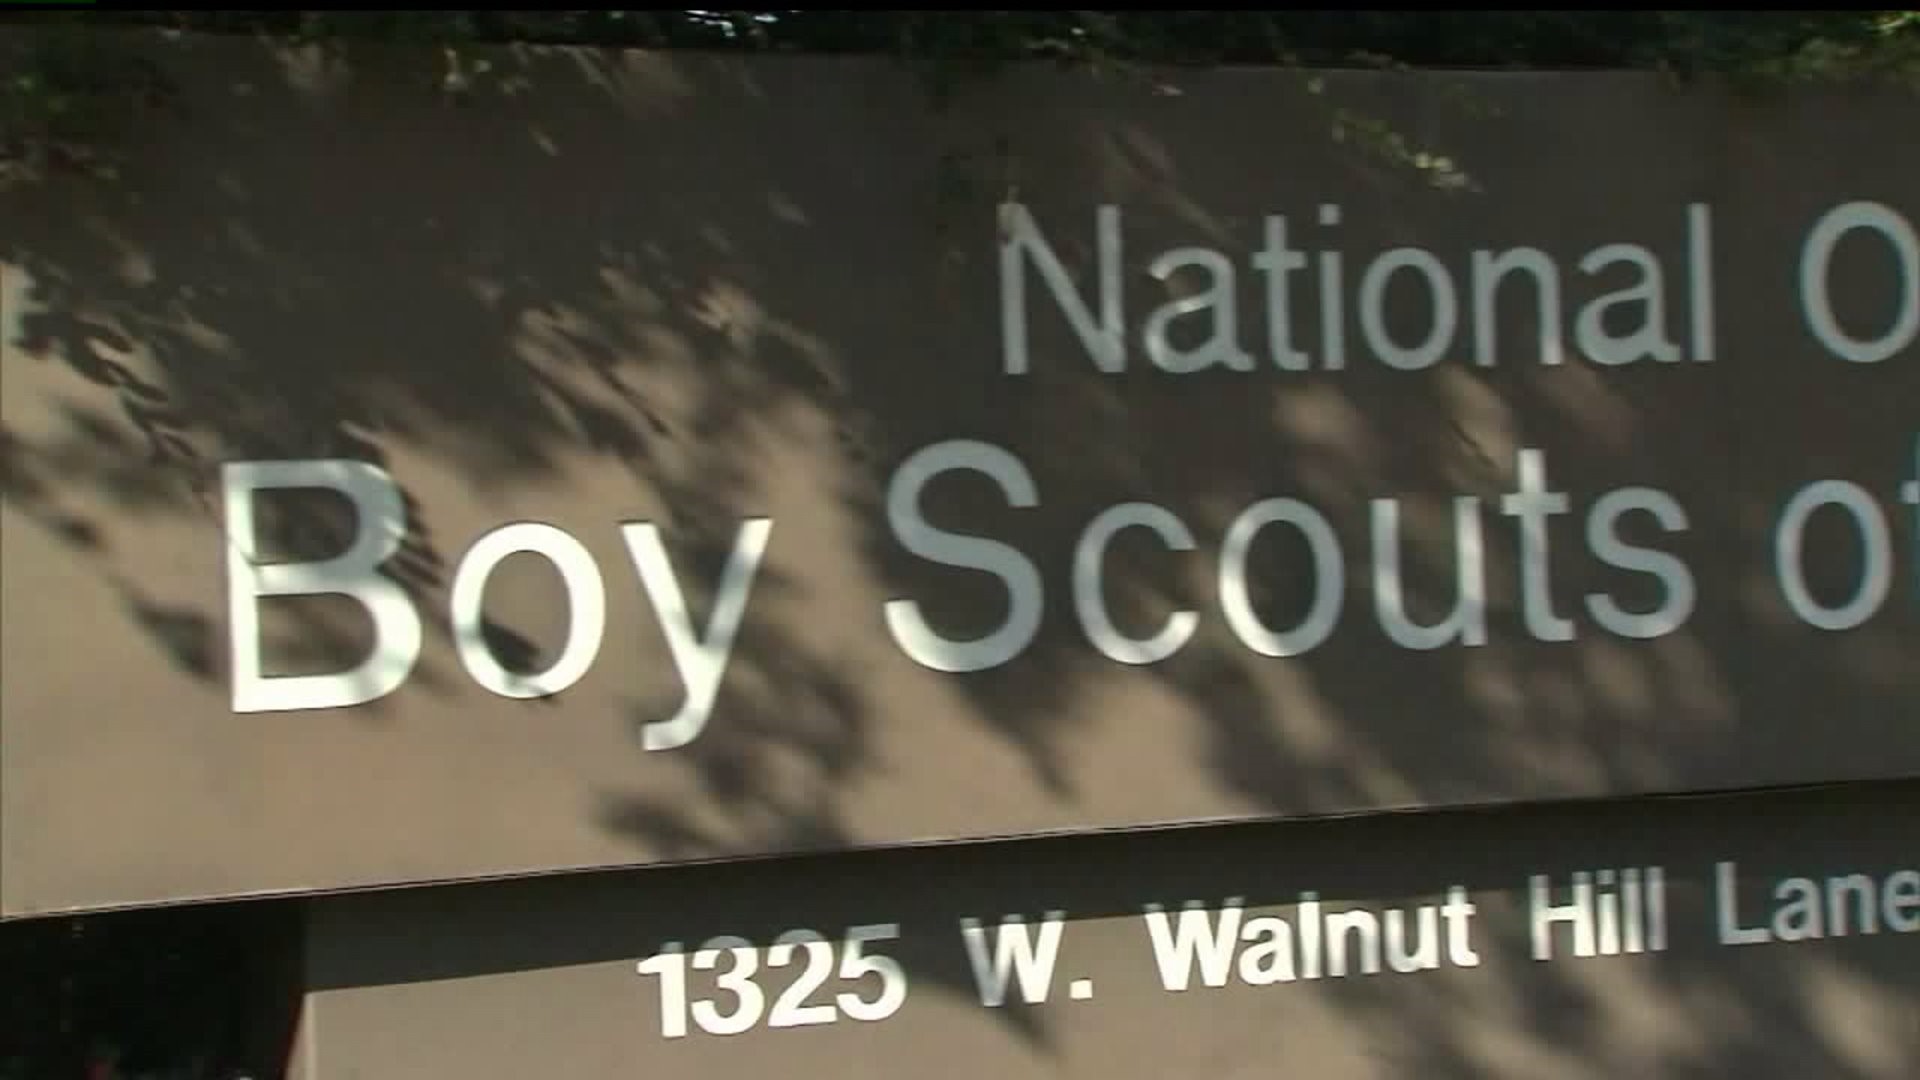 Local scouting groups react to Boy Scouts of America decision to admit girls